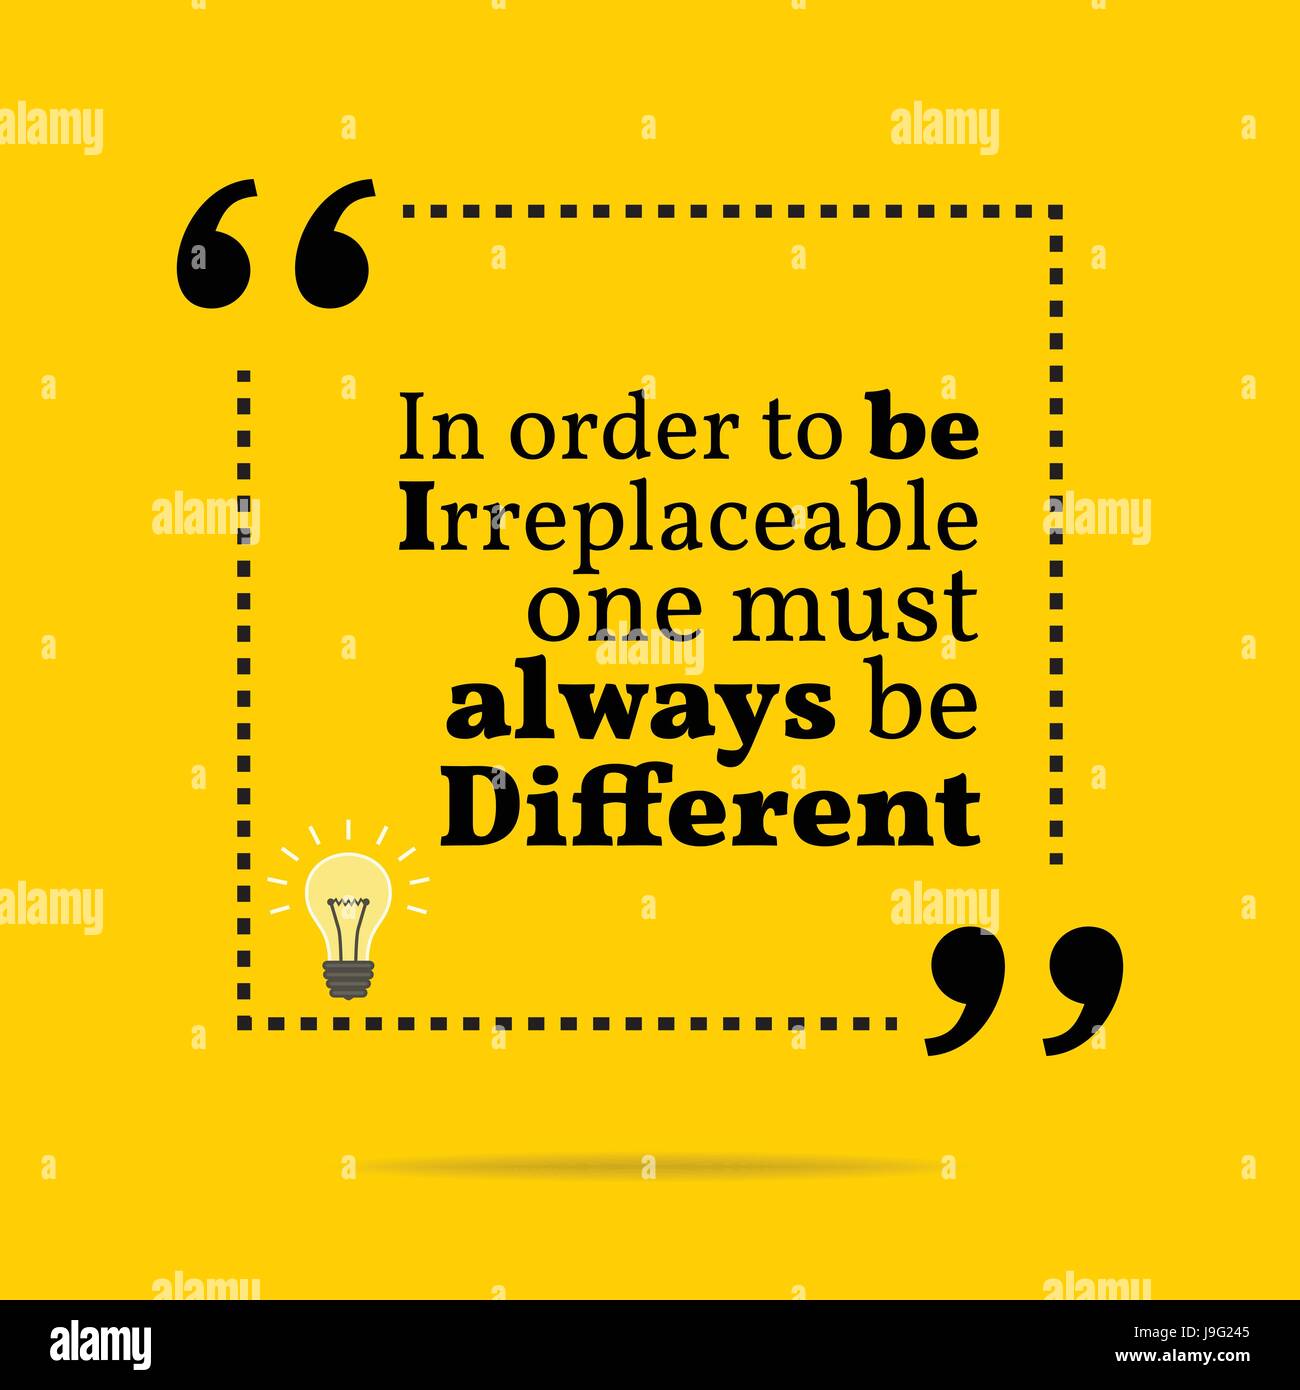 In Order To Be Irreplaceable, One Must Always Be Different